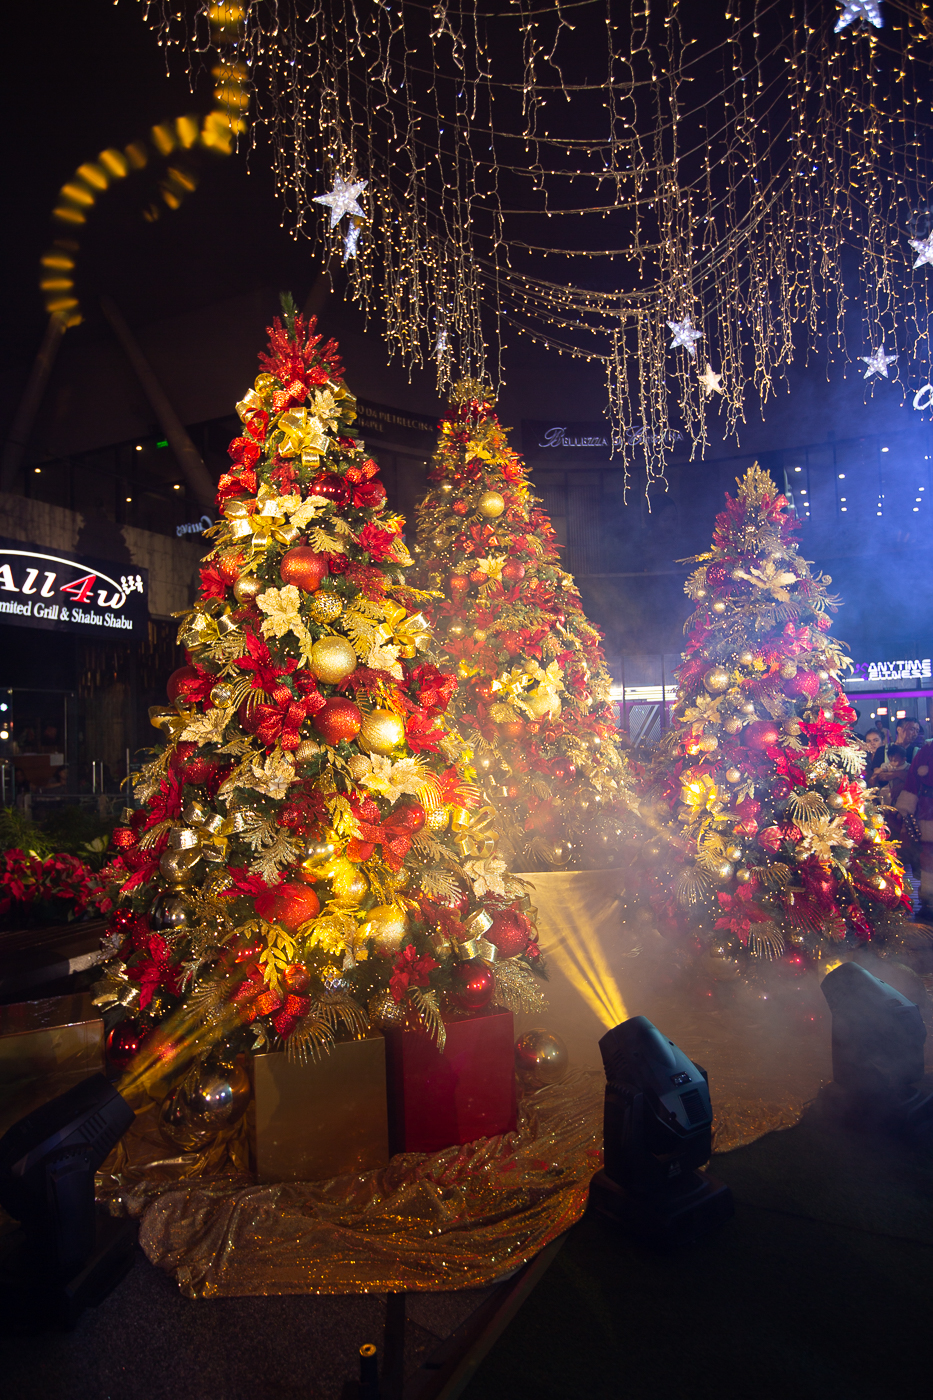 Yuletide cheer from around the world at Century City Mall